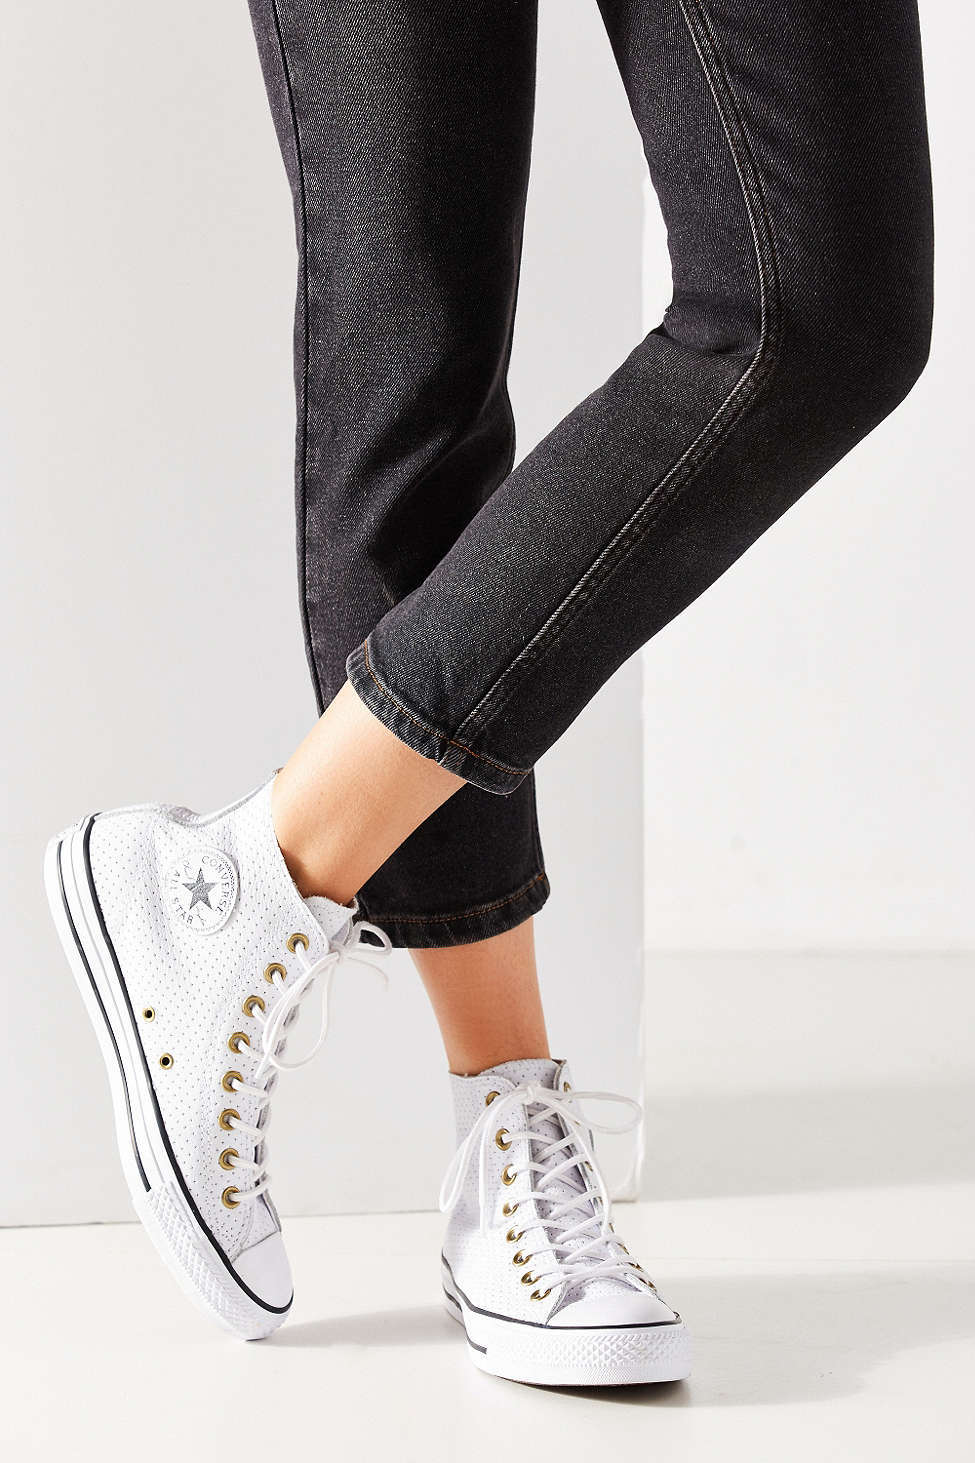 converse perforated